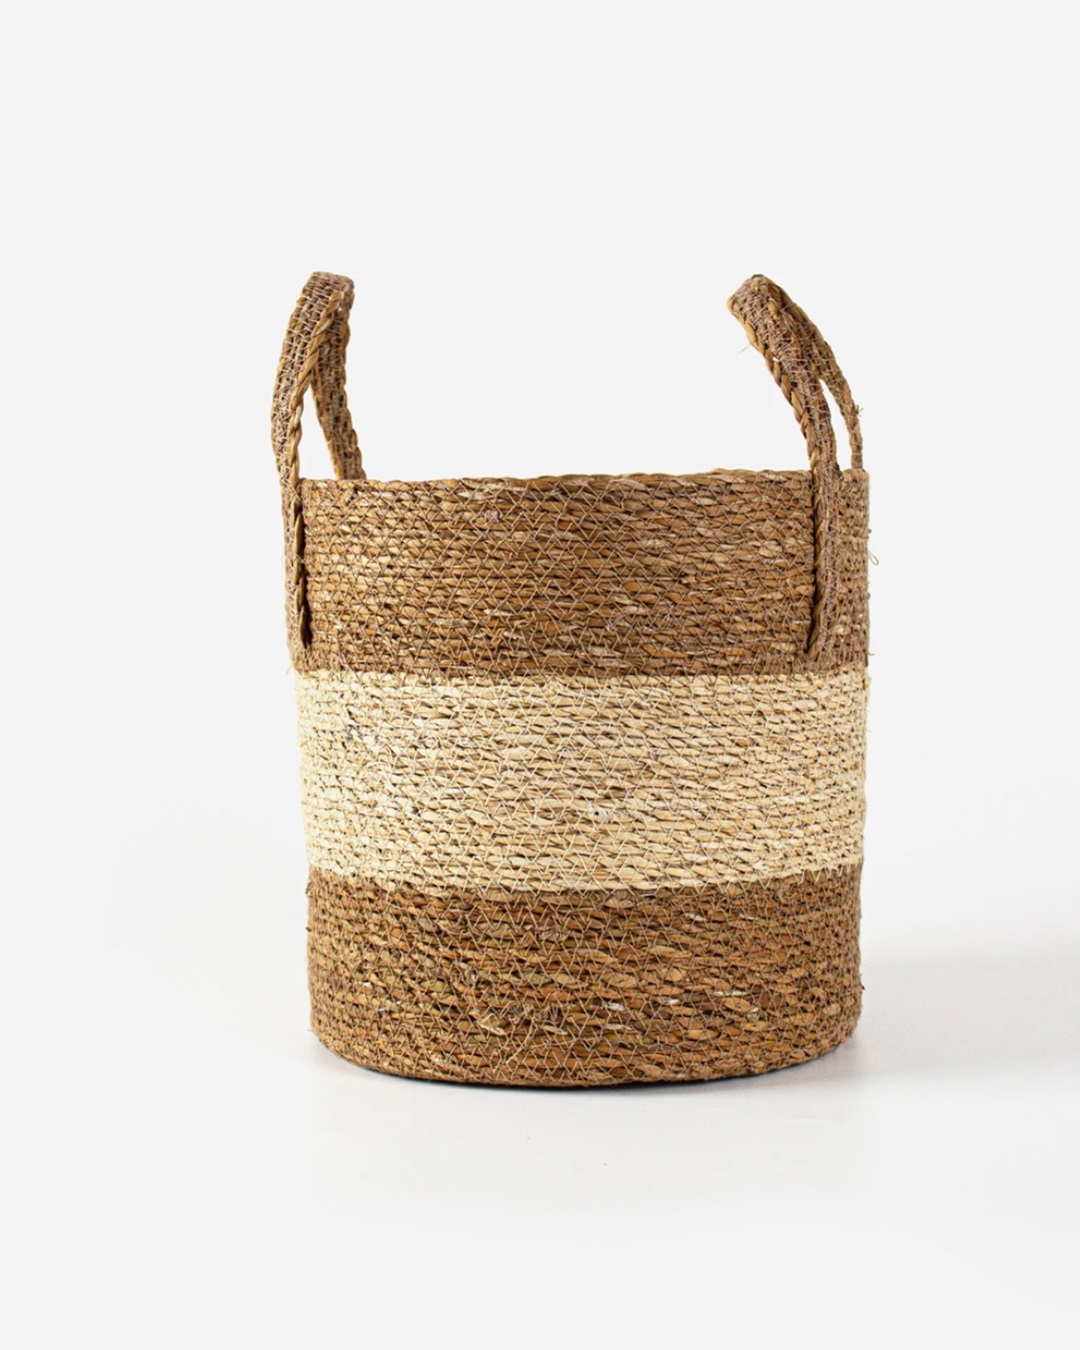 Round cylinder stripe brown natural seagrass basket with handle on each side